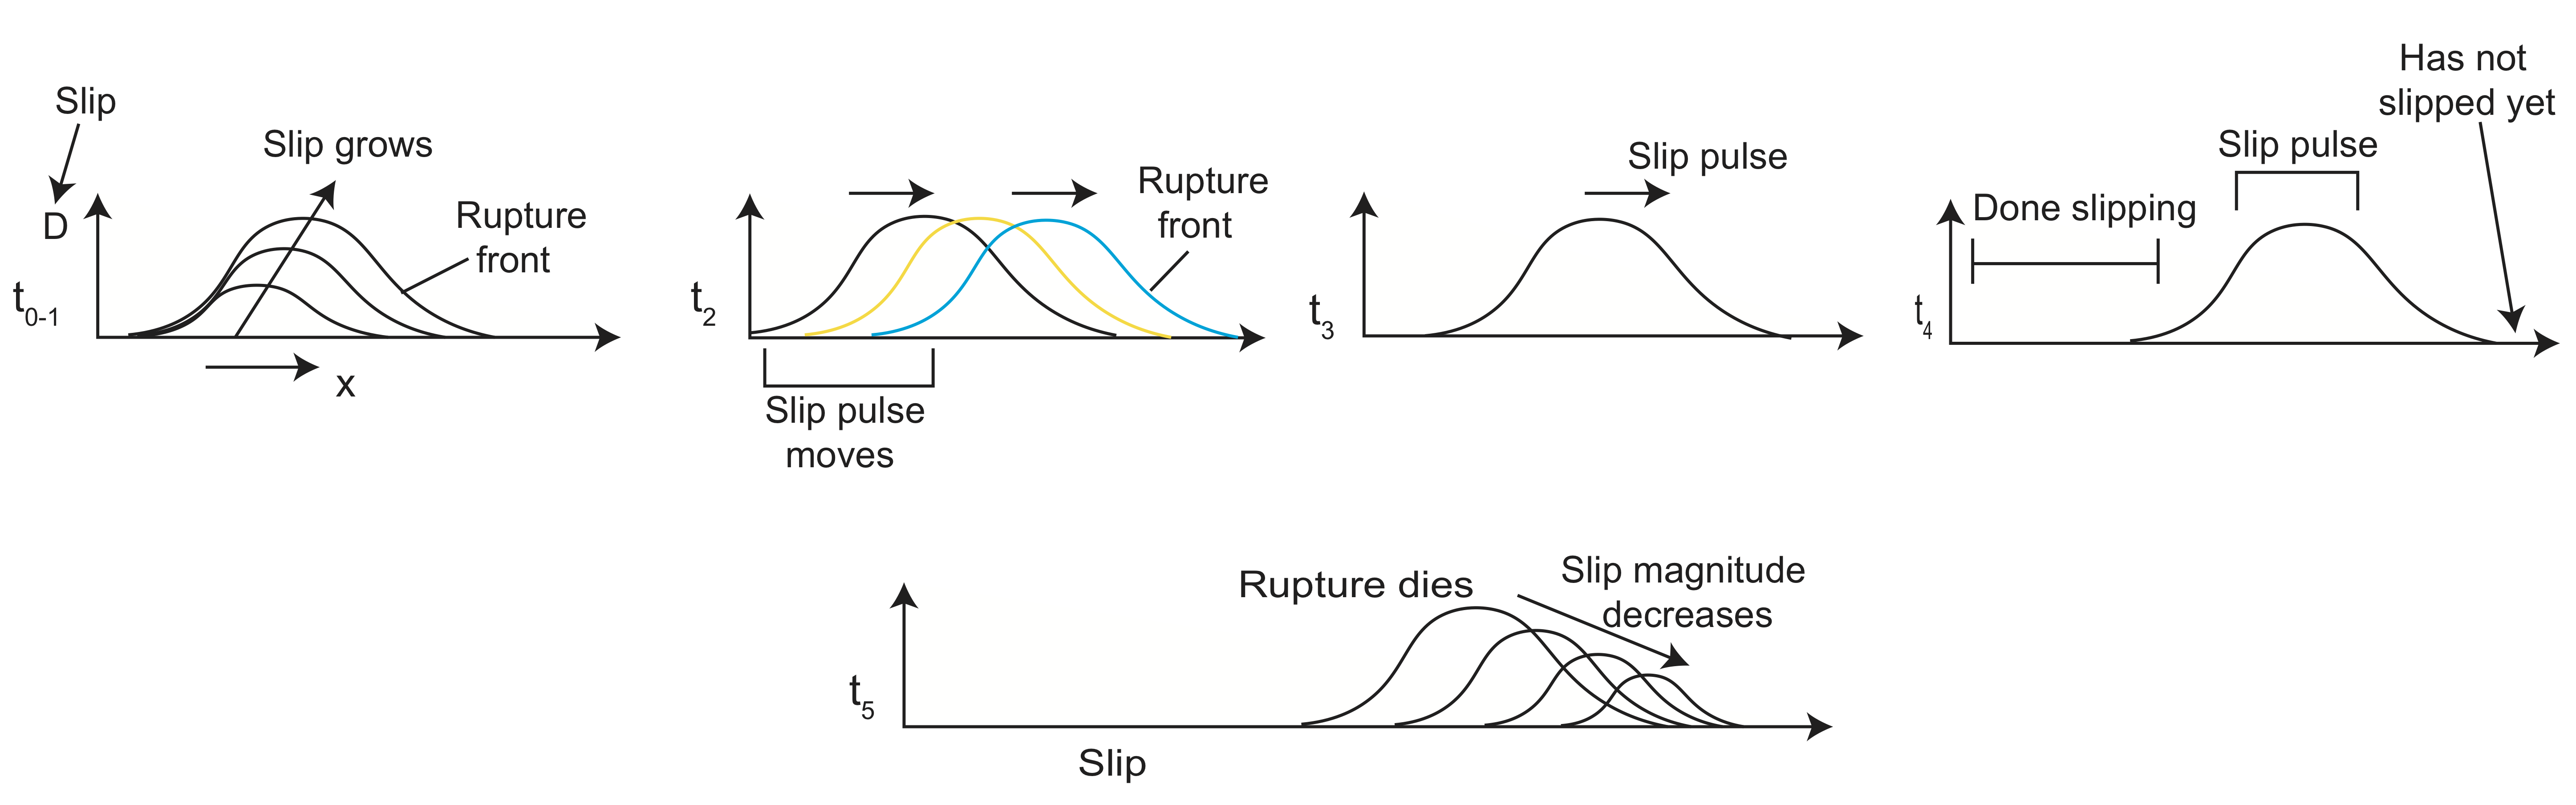 Step by step rupture graph.png